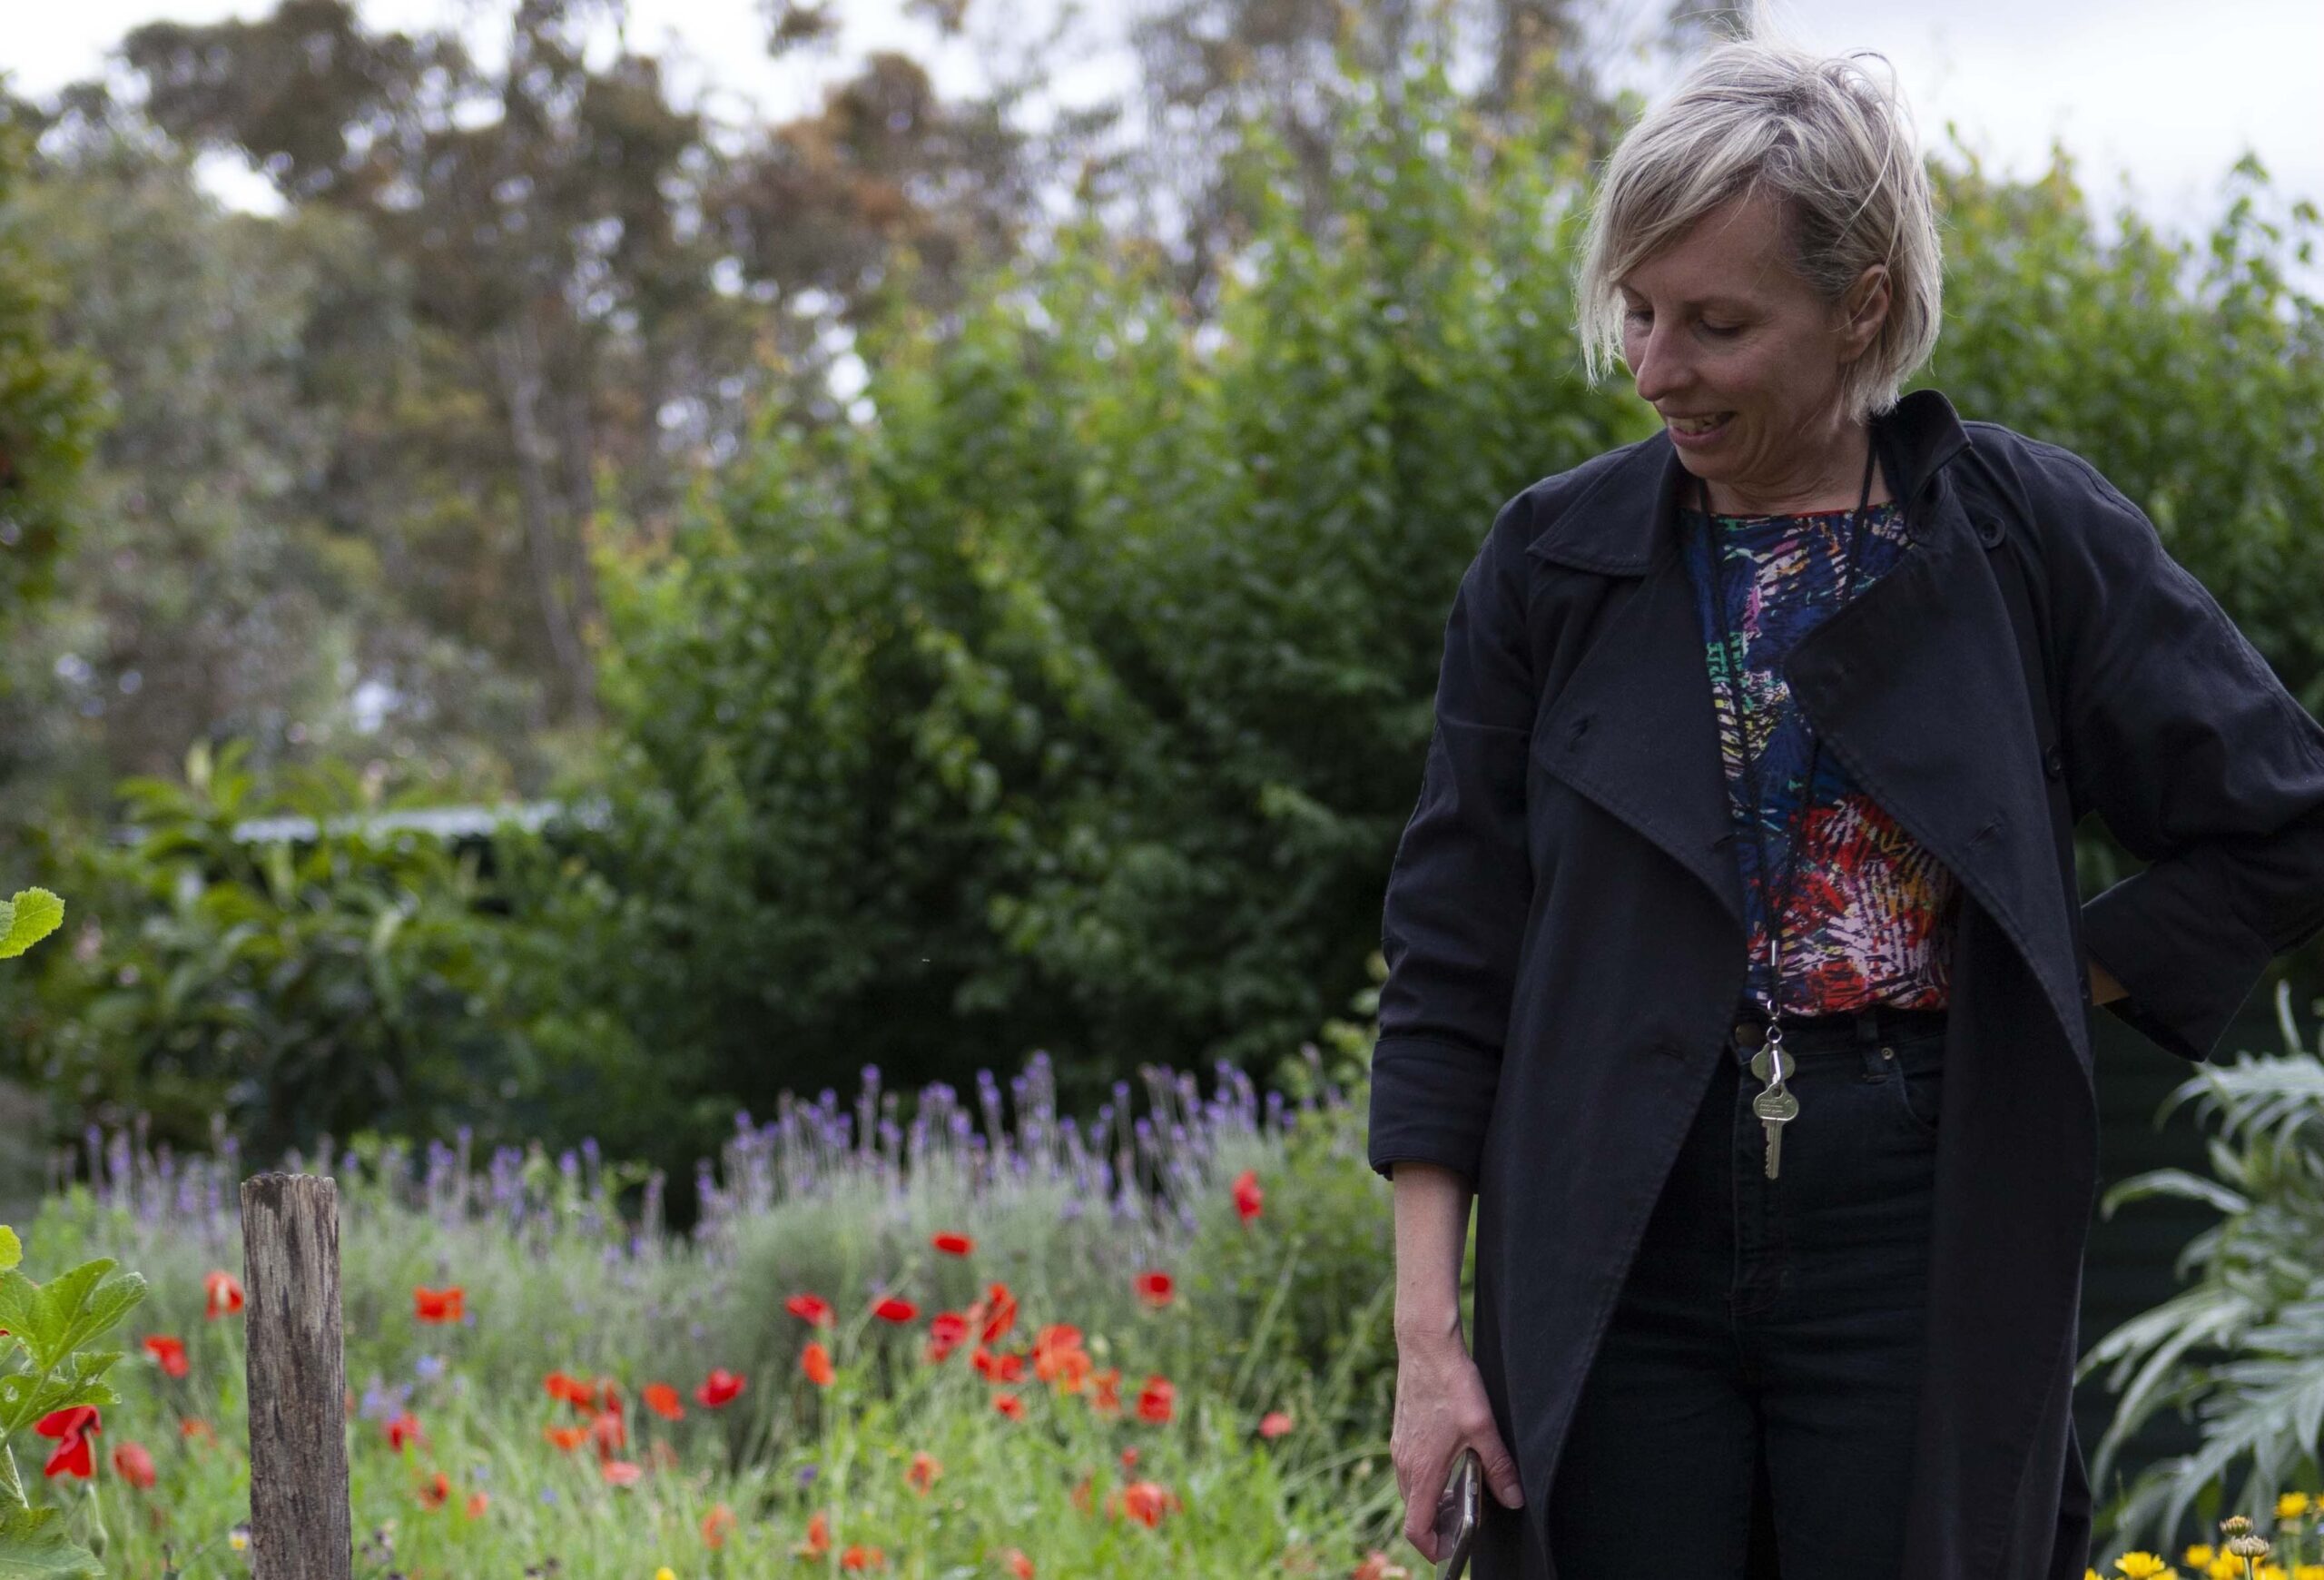 An image of RAV's Communications and Development Coordinator Claire Miovich. Clare has short blonde hair and wears a long black coat. She is standing in a lush garden with poppies and lavender in the background. In the distance there are some out of focus eucalyptus trees.